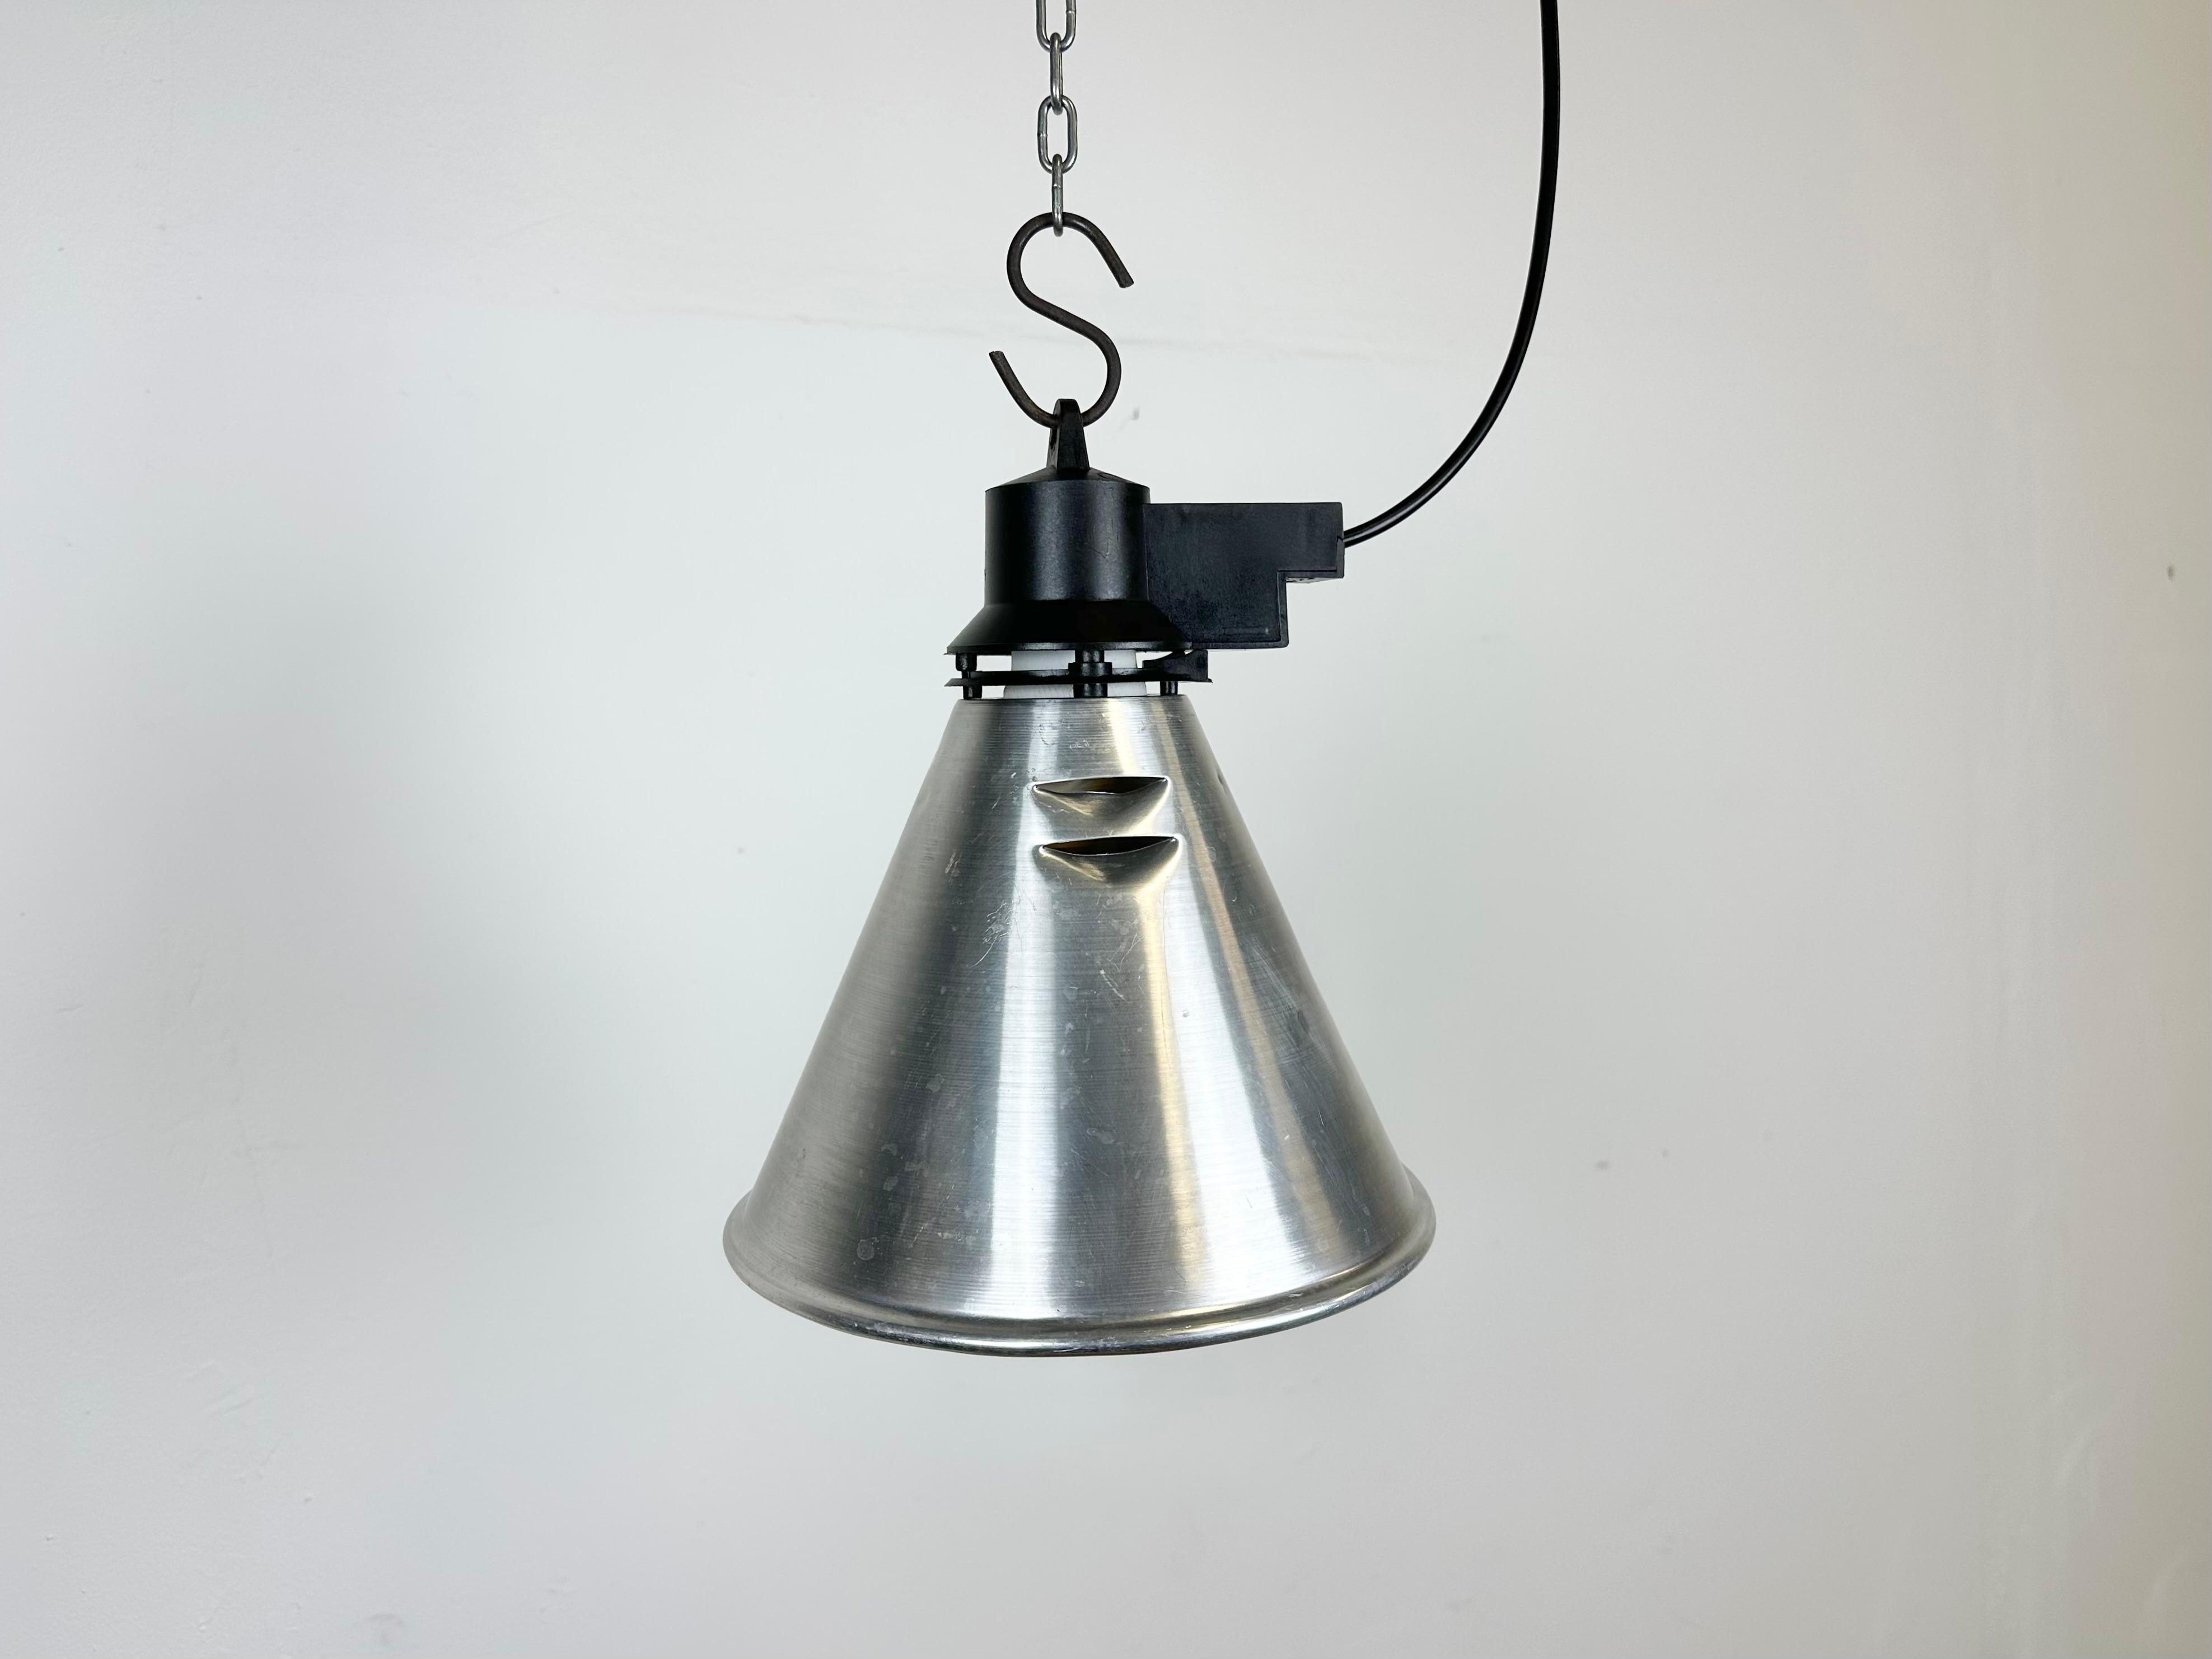 Small Industrial factory pendant light made in France during the 1960s. It features a silver aluminium shade and a black bakelite top  .The porcelain socket requires standard E 27/ E26 light bulbs. New wire. Fully functional. The weight of the lamp